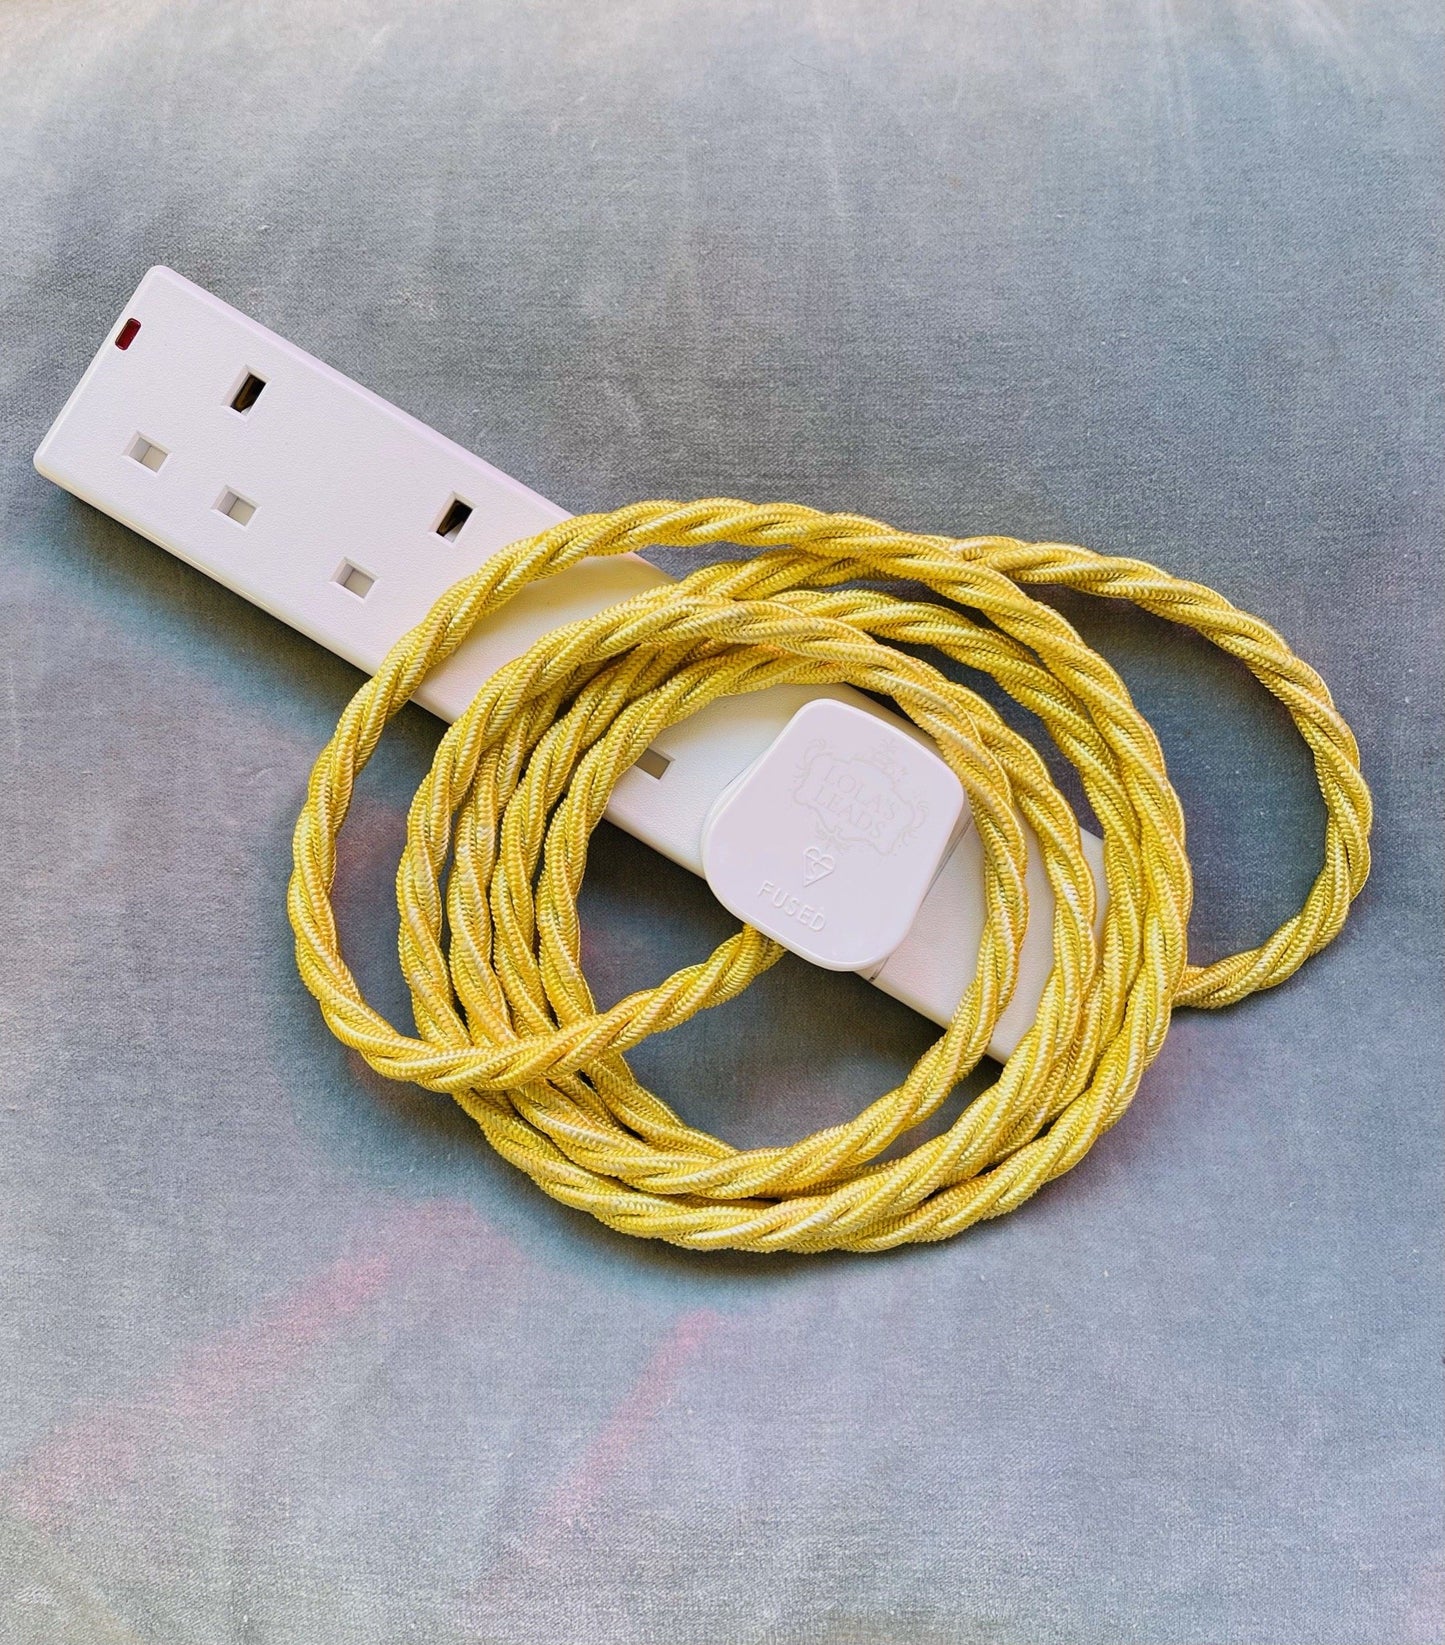 Lola's Leads Extension Cable - Primrose + White 2m 4 Gang